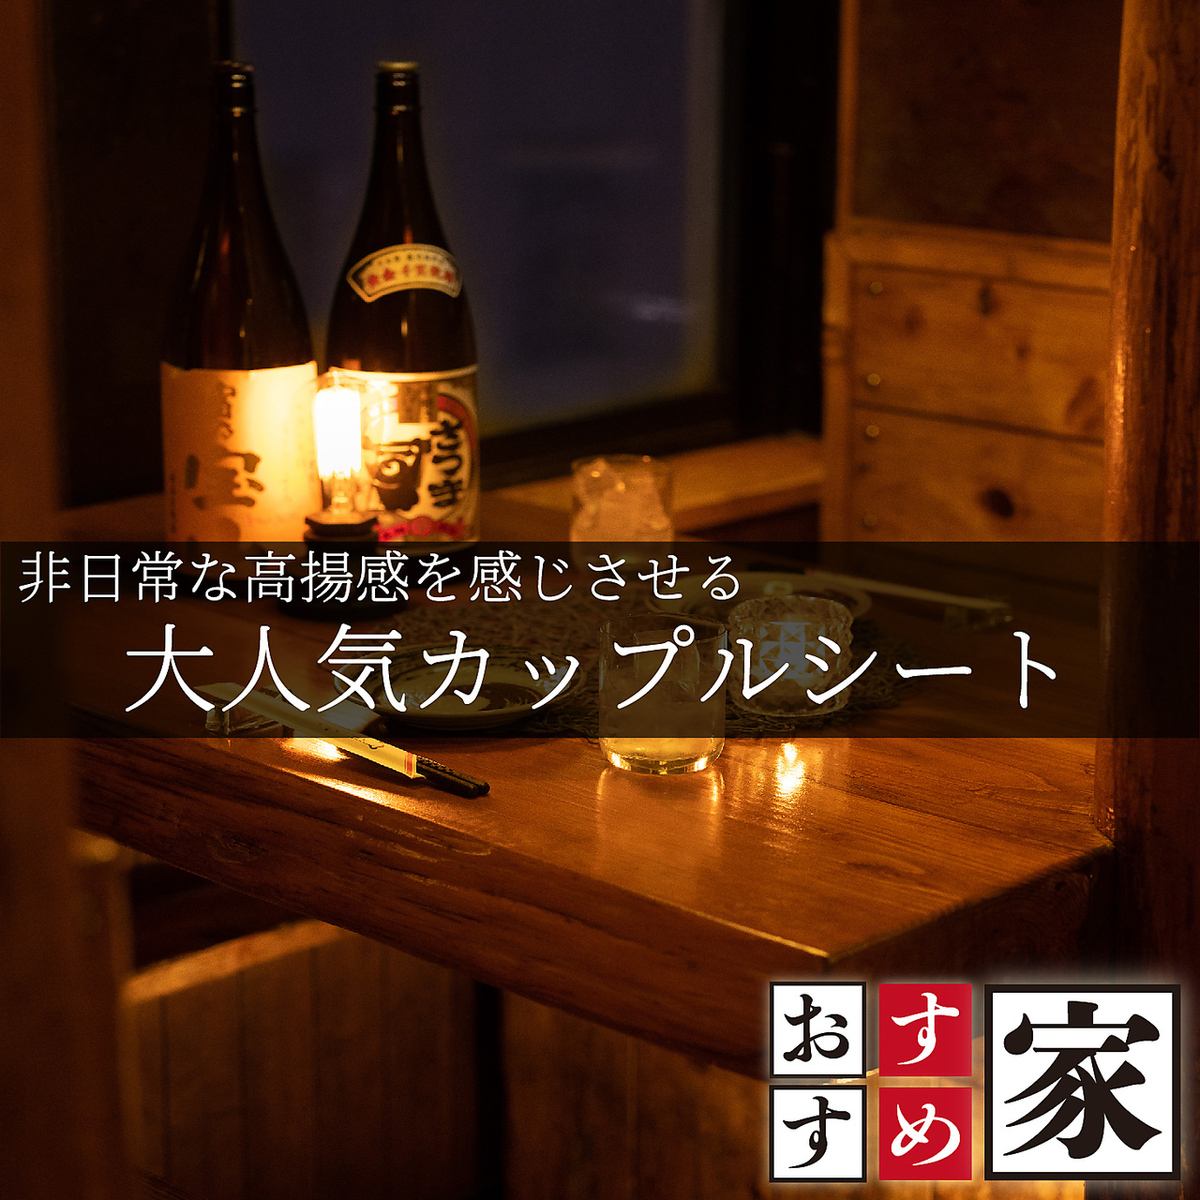 We have a private room where you can relax and relax.We also have a wide variety of shochu and sake!